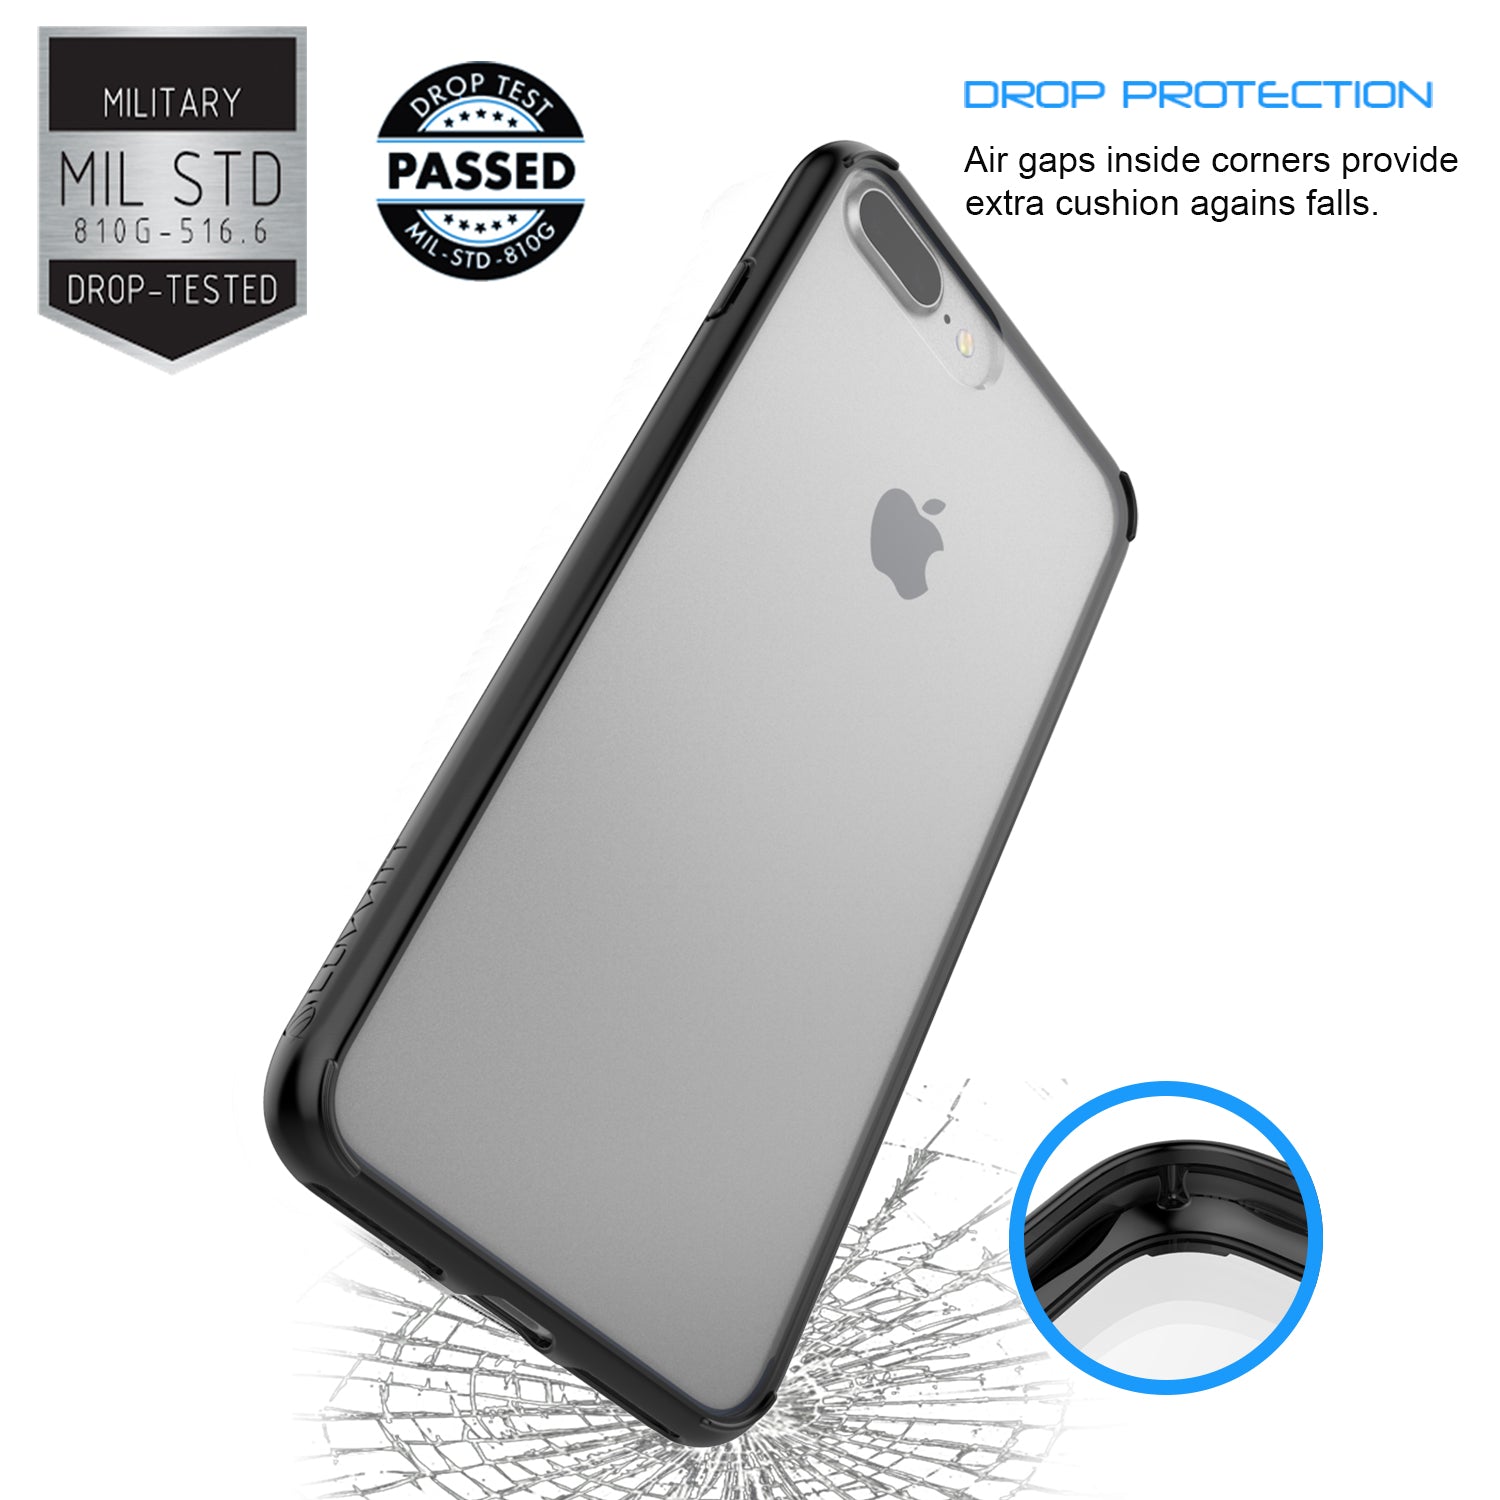 Luvvitt Clear View Hybrid Case for iPhone 8 Plus - Black